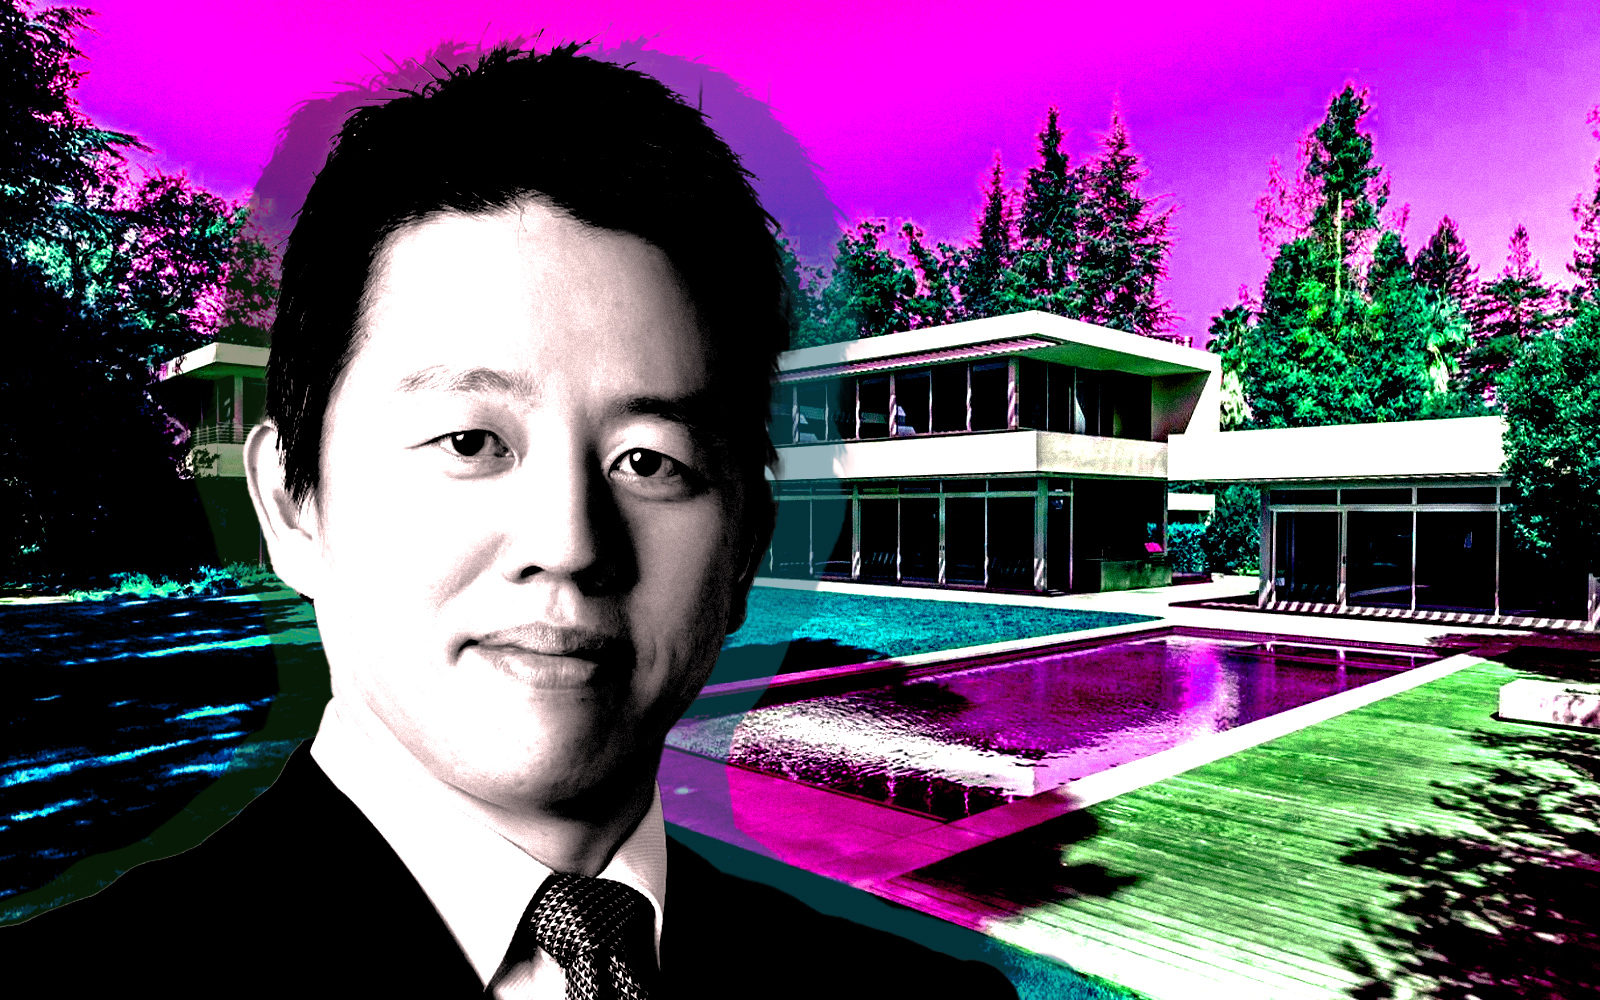 Japanese home shopping CEO pays $20M for Atherton home